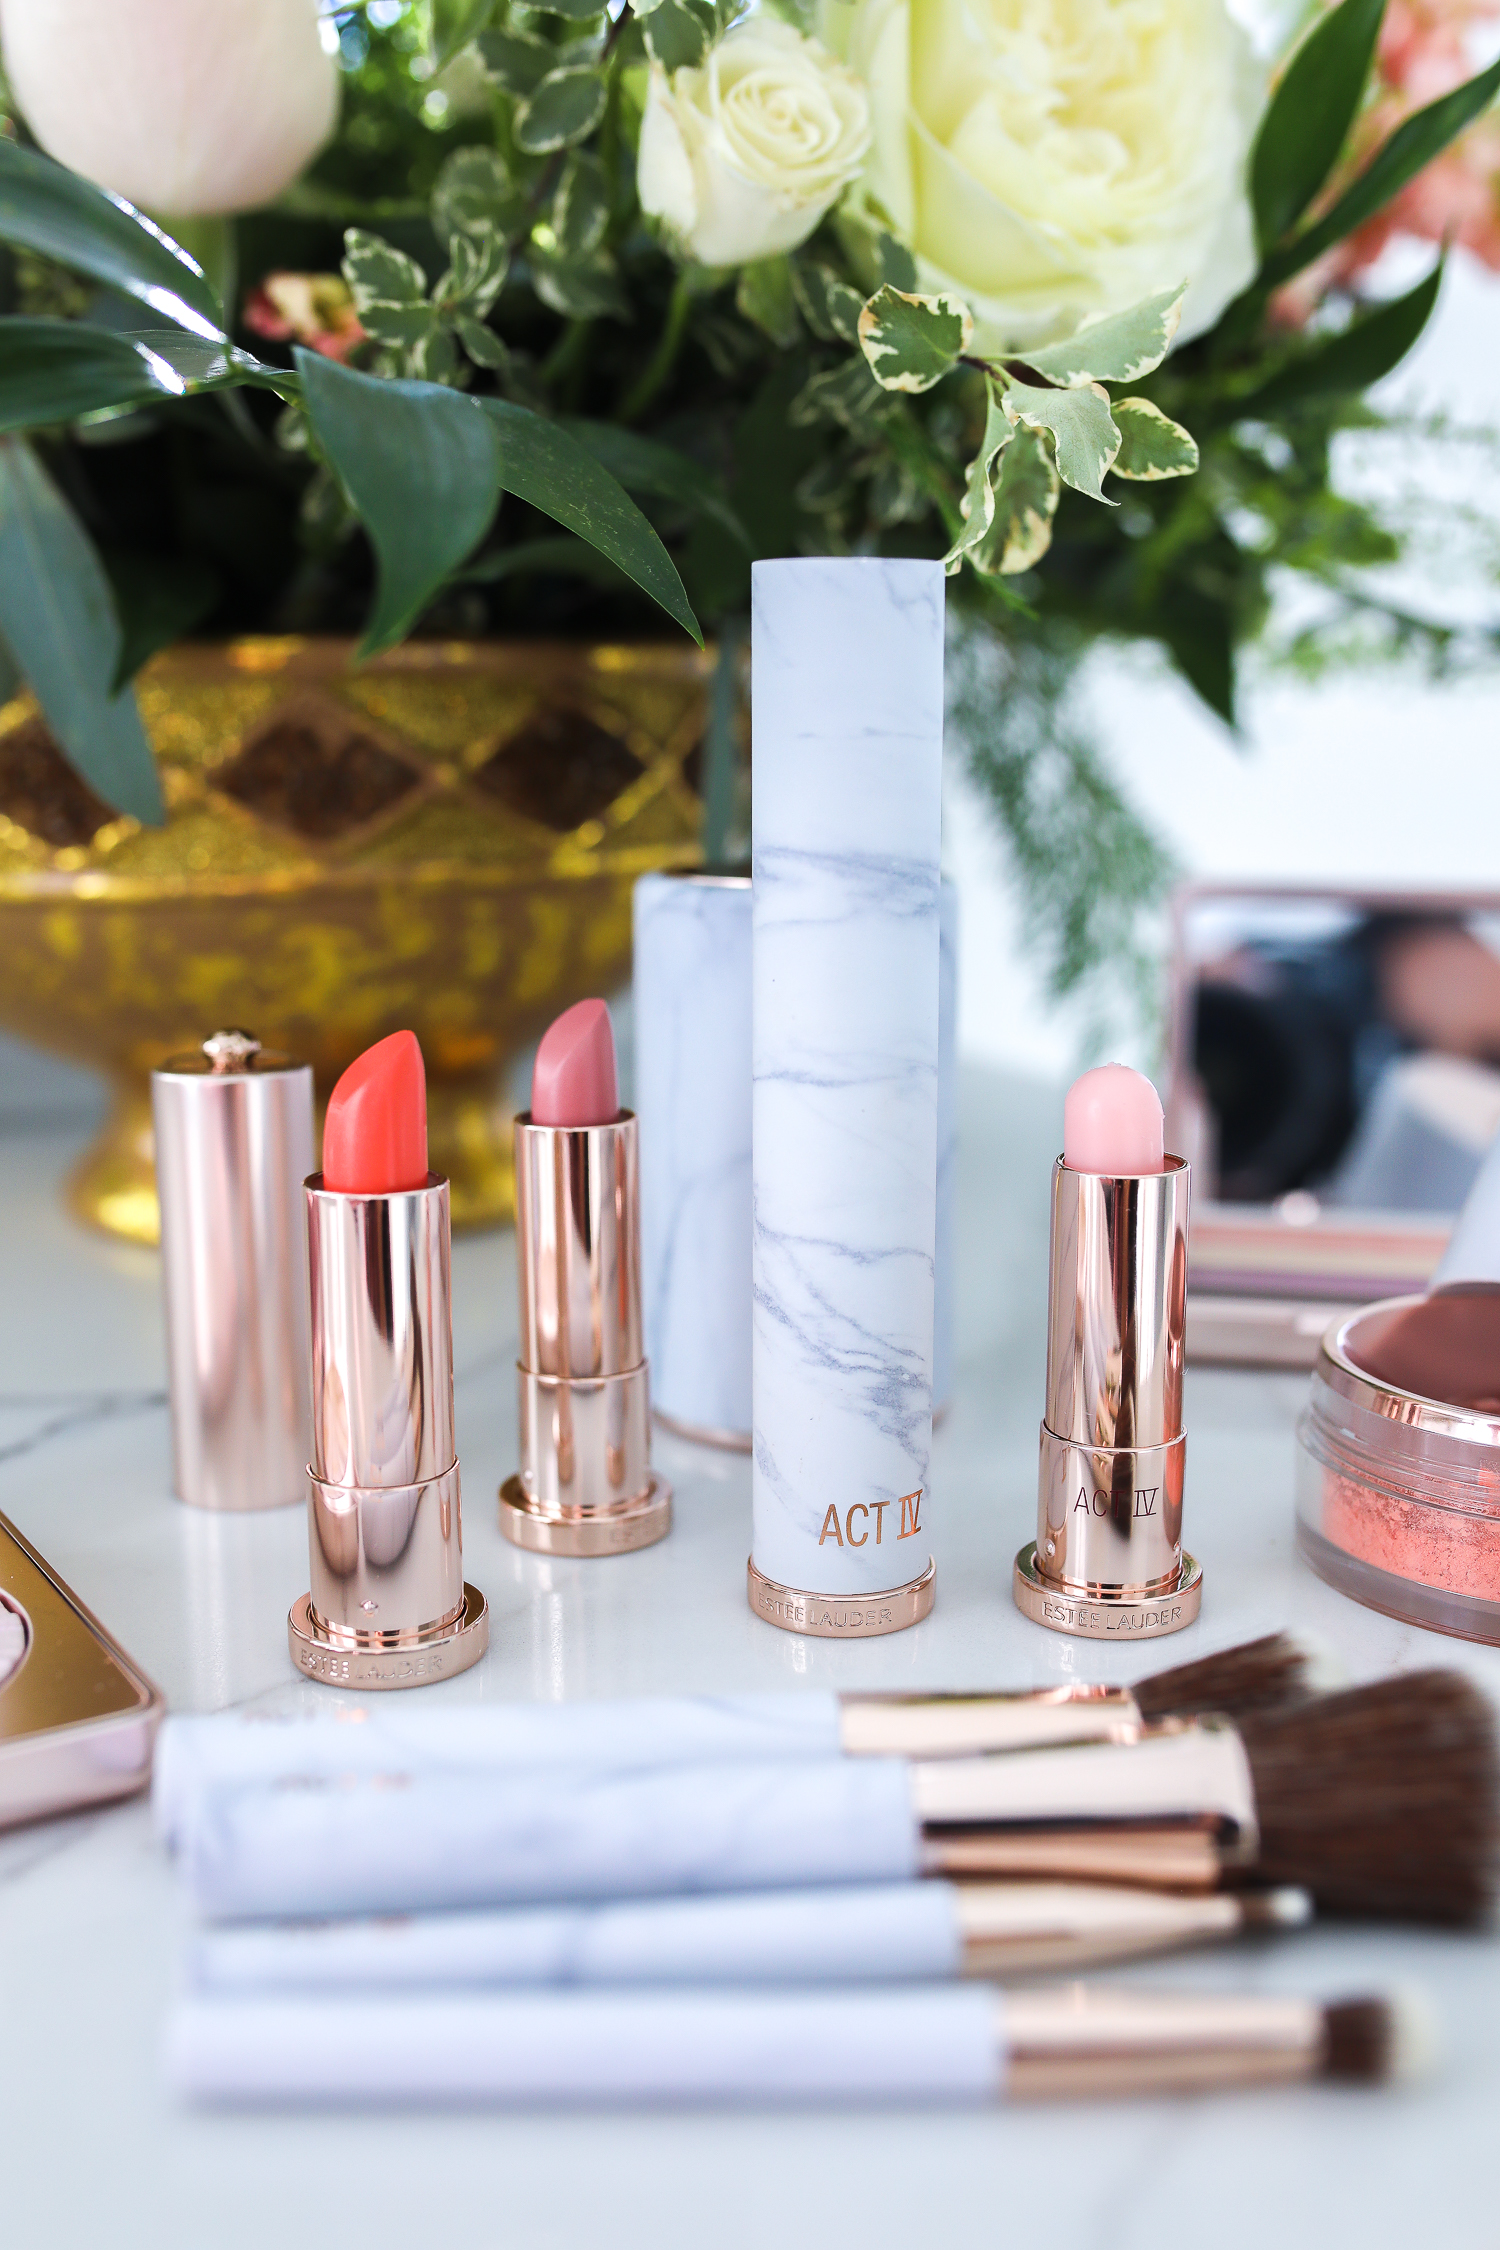 Estee Lauder Makeup by popular US beauty blog, The Sweetest Thing: image of Estee Lauder Act IV makeup products. 